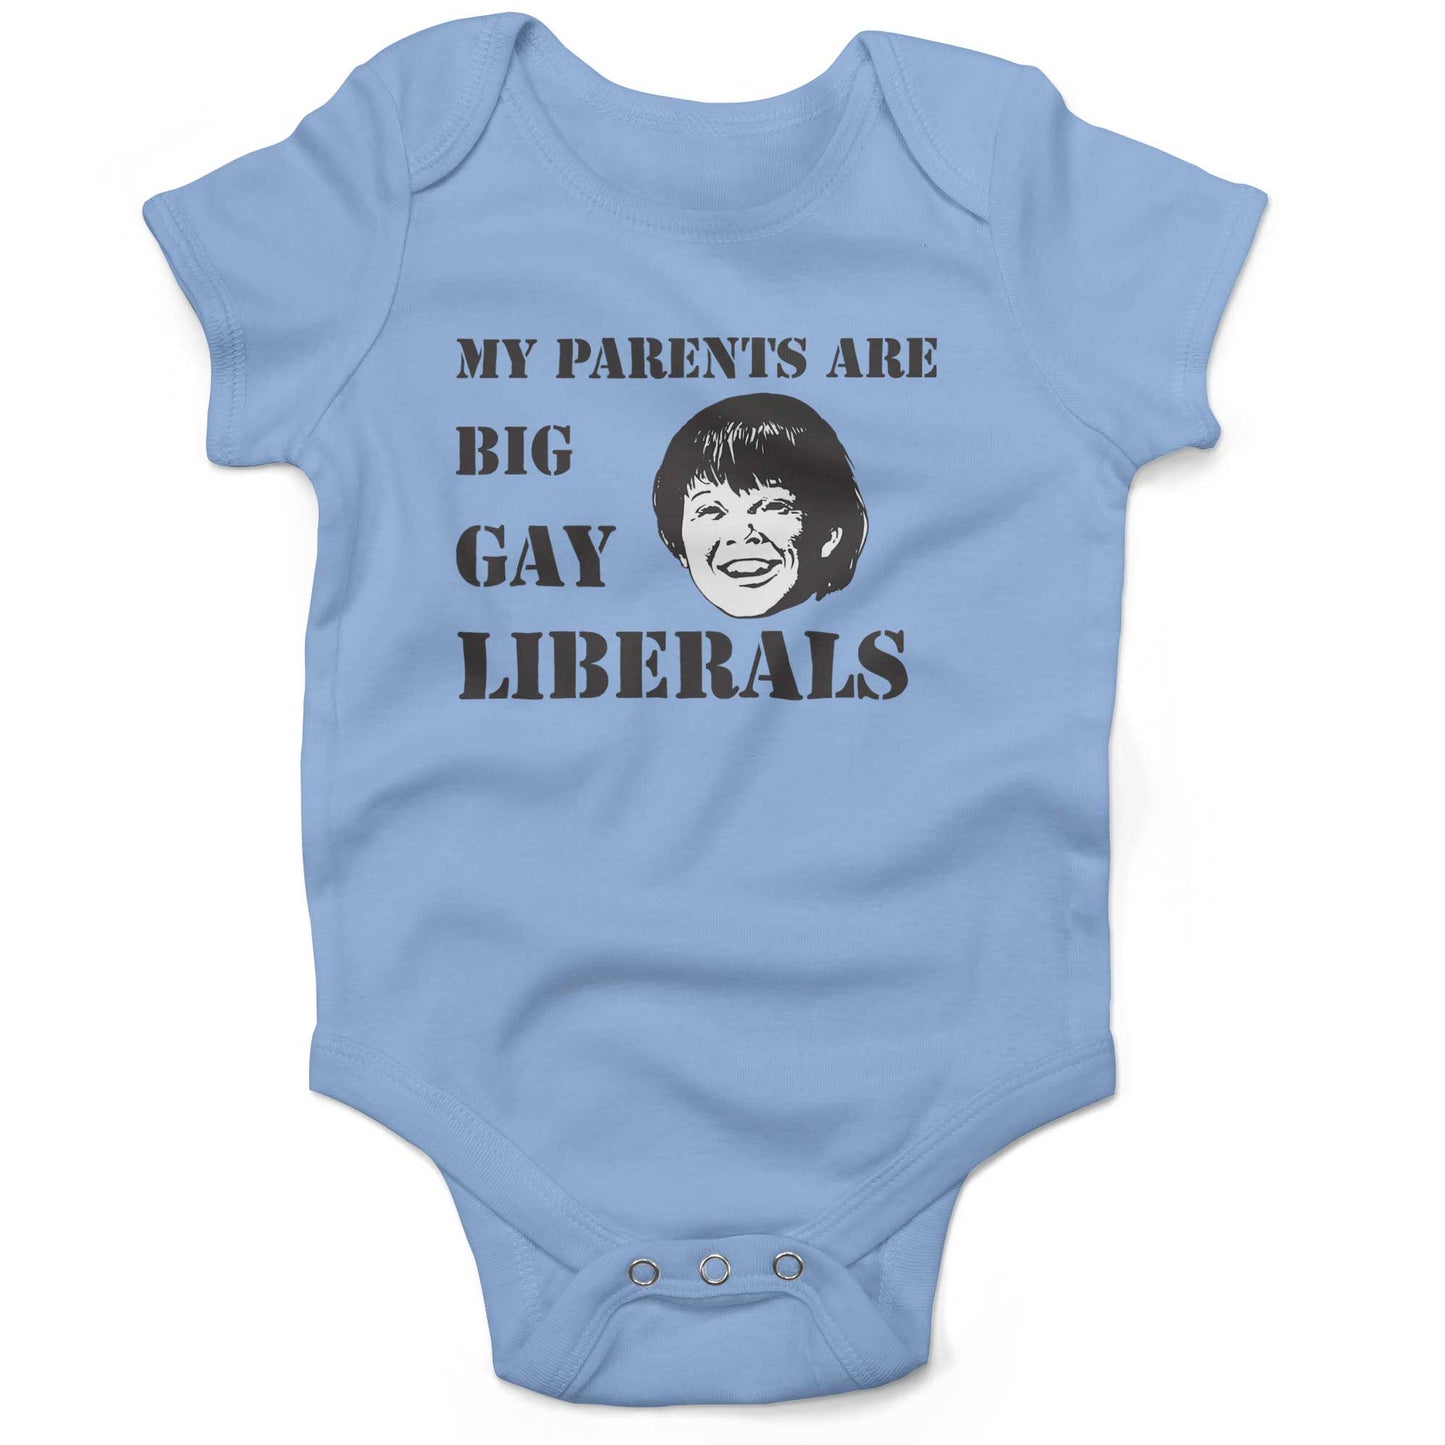 My Parents Are Big, Gay Liberals Infant Bodysuit or Raglan Baby Tee-Organic Baby Blue-3-6 months